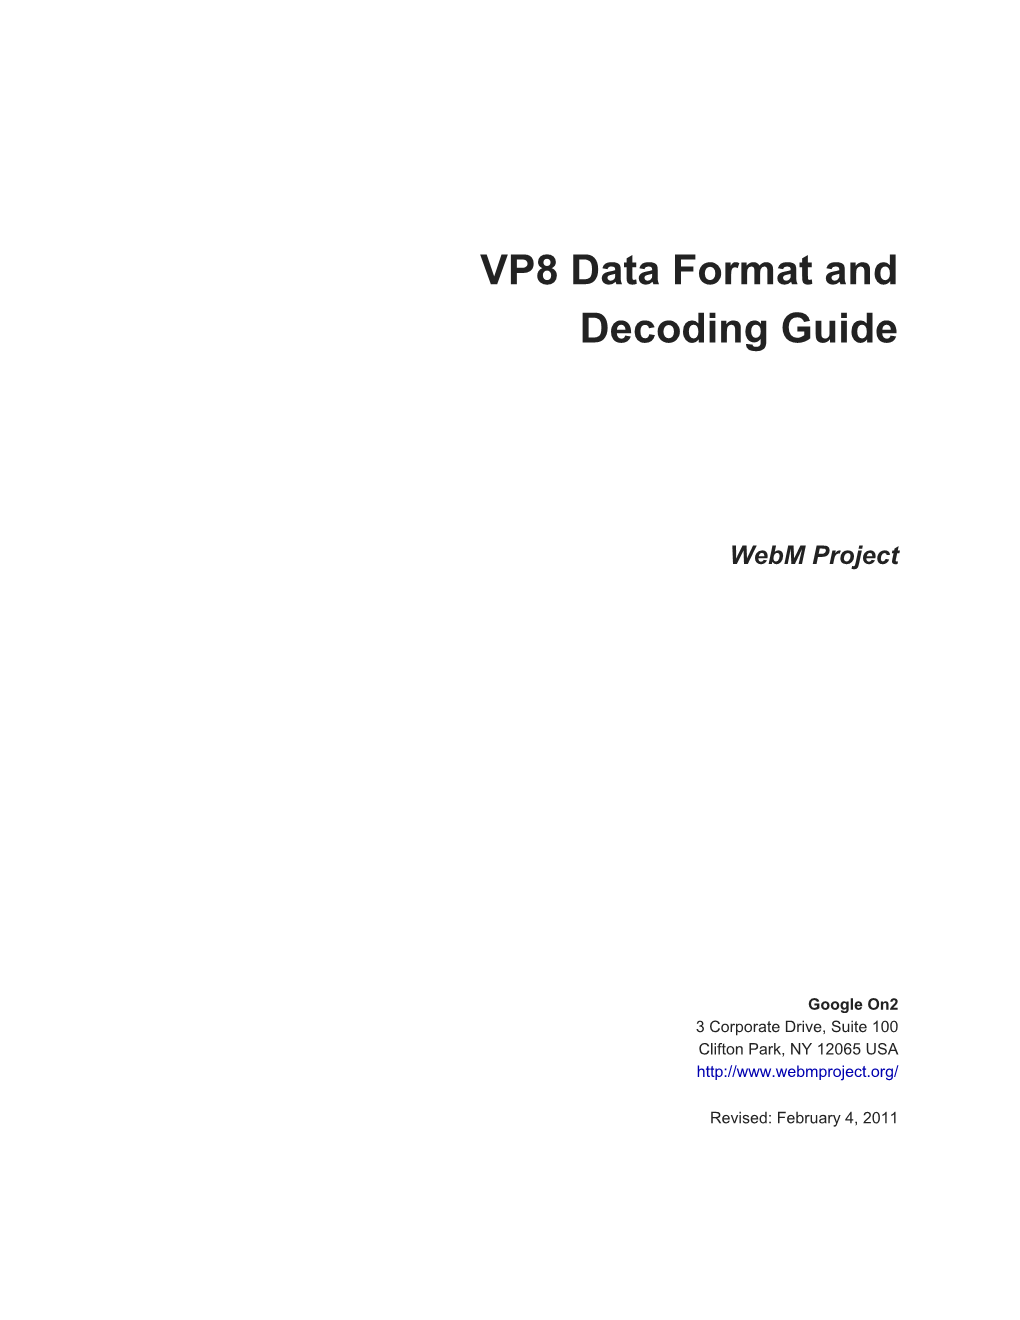 VP8 Data Format and Decoding Guide